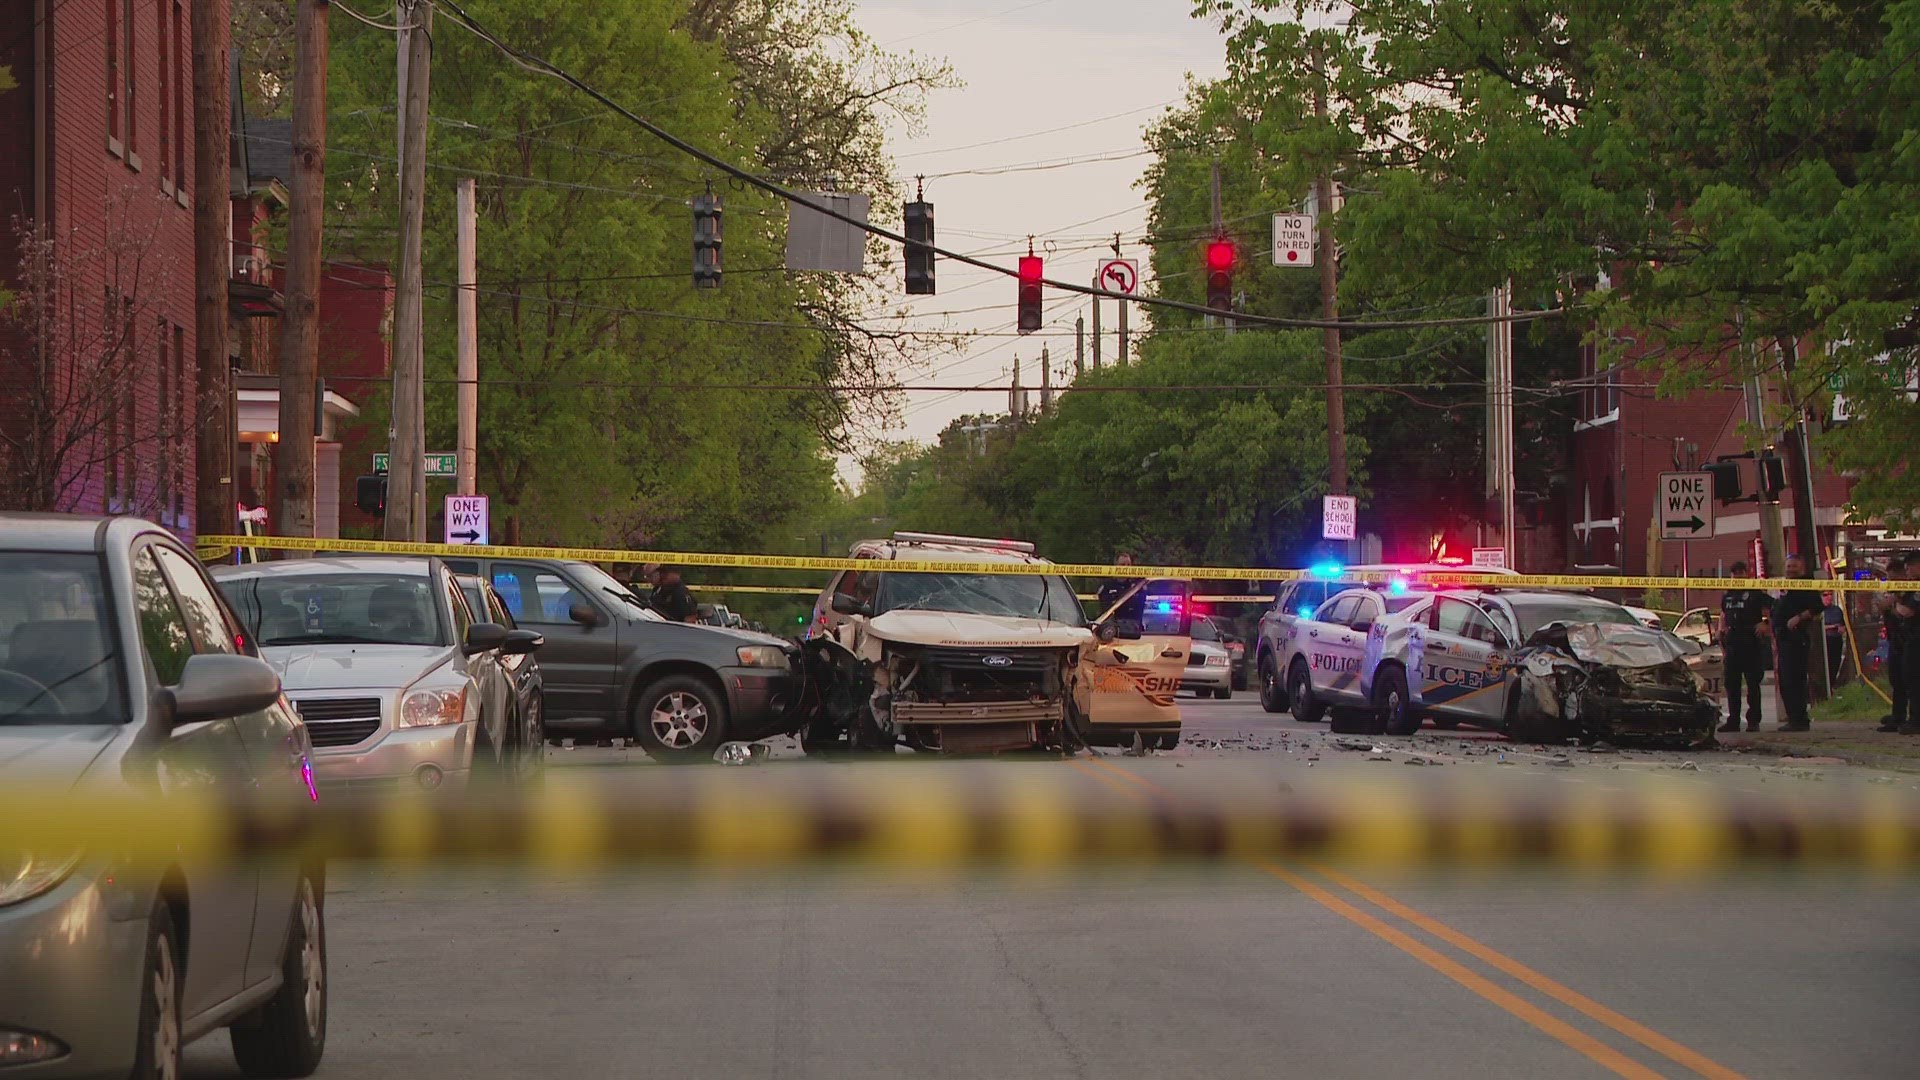 A Louisville Metro Police officer and Jefferson County Sheriff's deputy were among those injured.